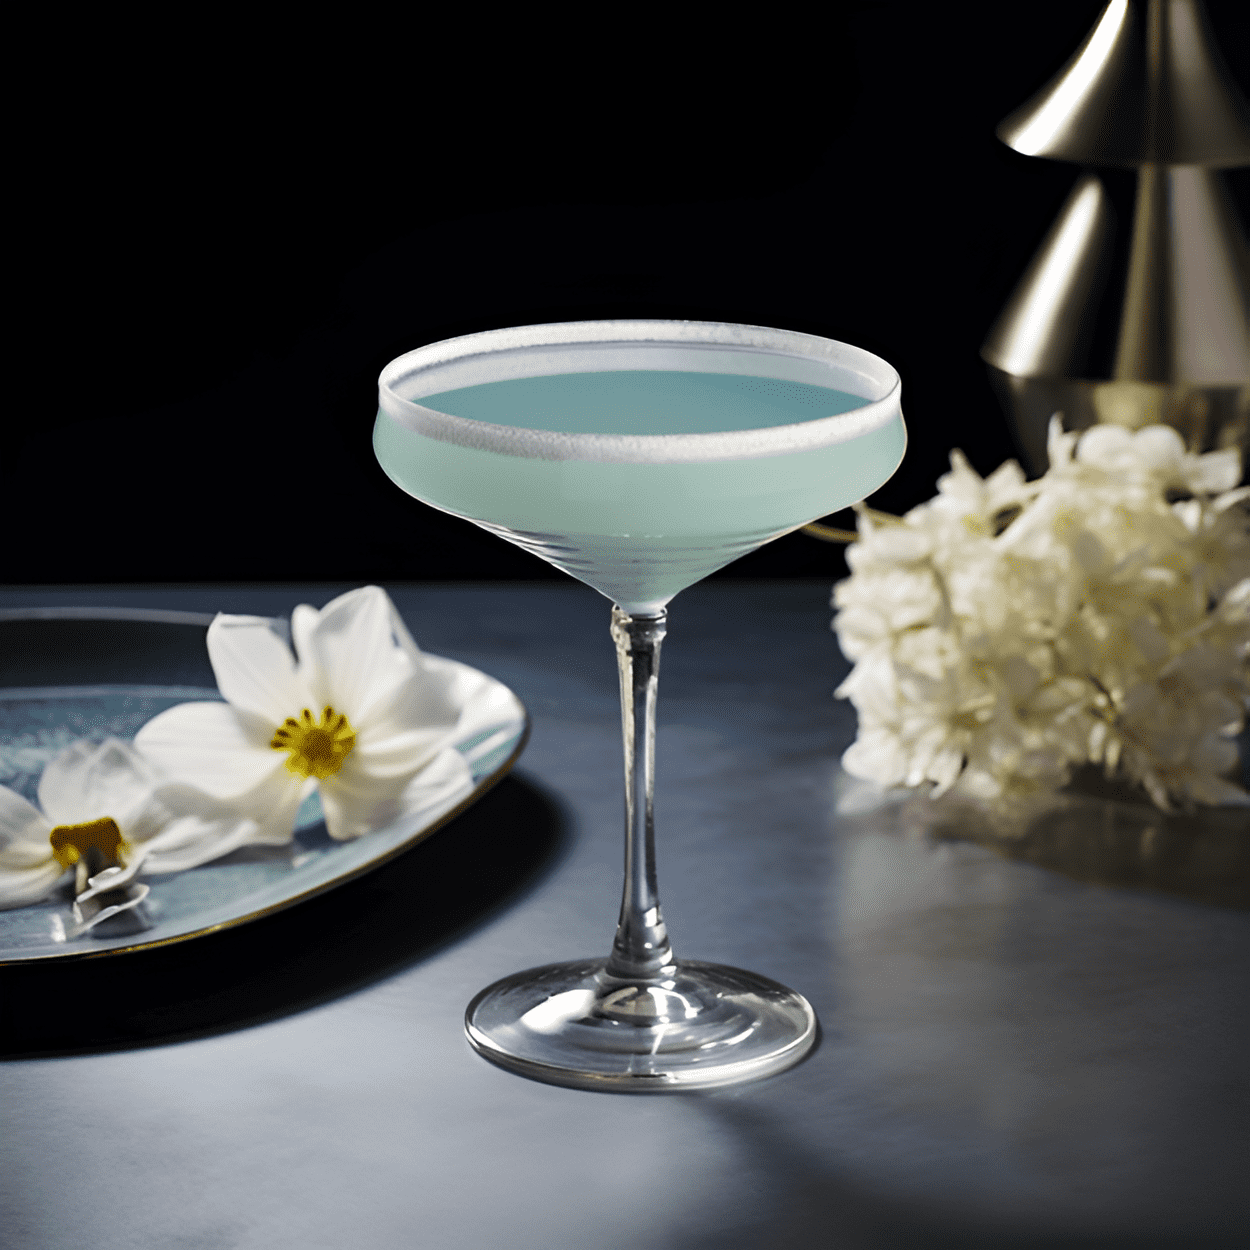 Tiffany Cocktail Recipe - The Tiffany cocktail is a harmonious blend of sweet, sour, and slightly bitter flavors. It has a smooth, velvety texture and a refreshing, crisp finish.